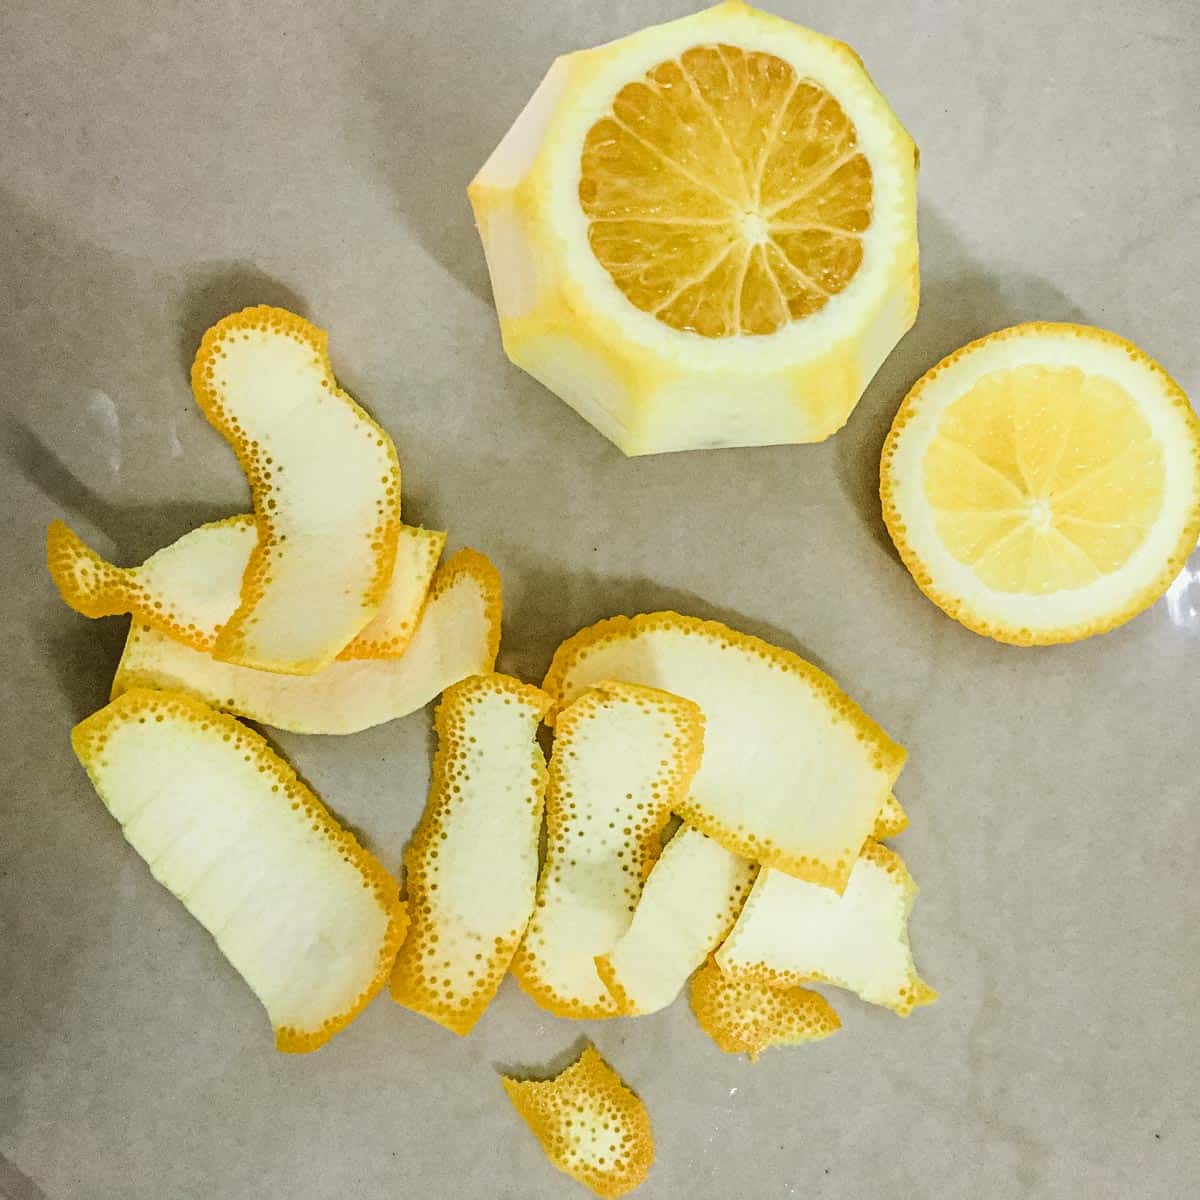 An citrus fruit with its skin cut.